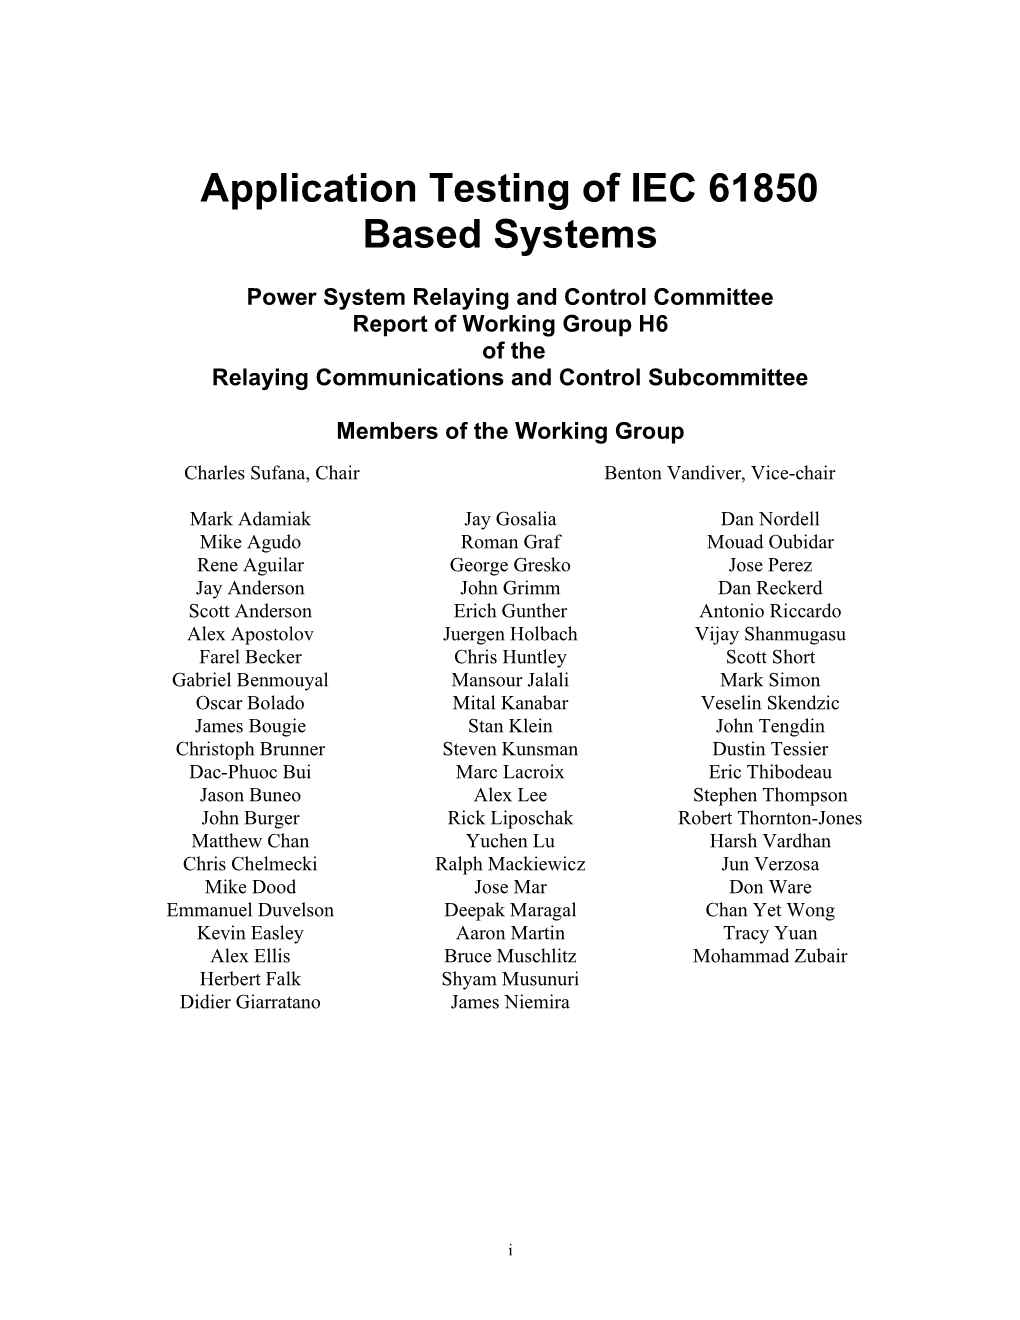 Application Testing of IEC 61850 Based Systems